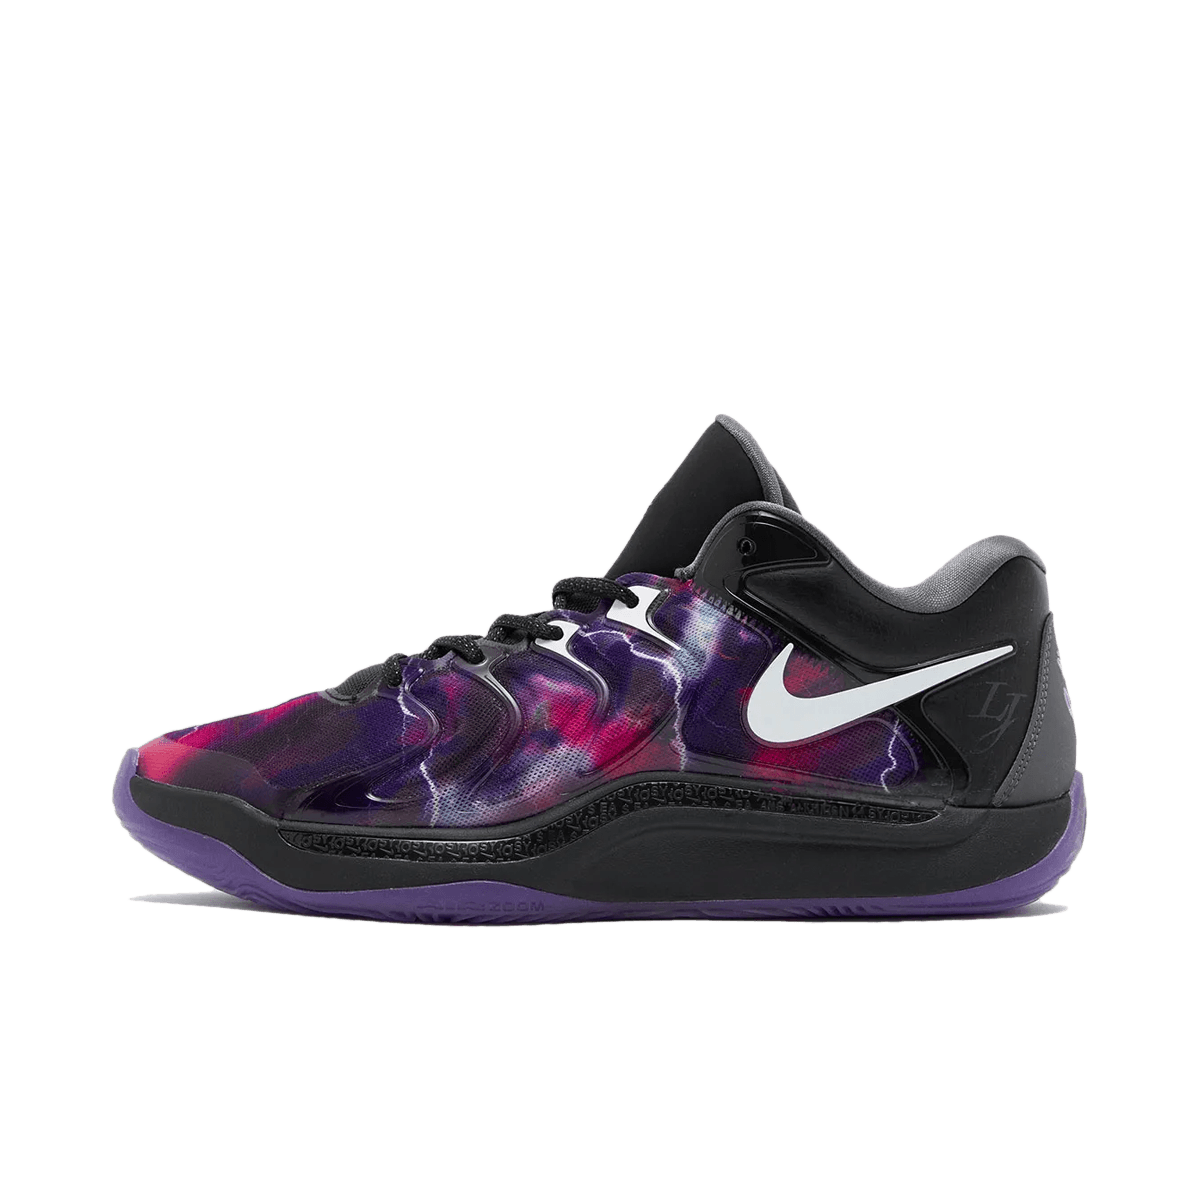 Metro Boomin x Nike KD 17 'Atomic Violet' - Producer Pack HJ4464-001